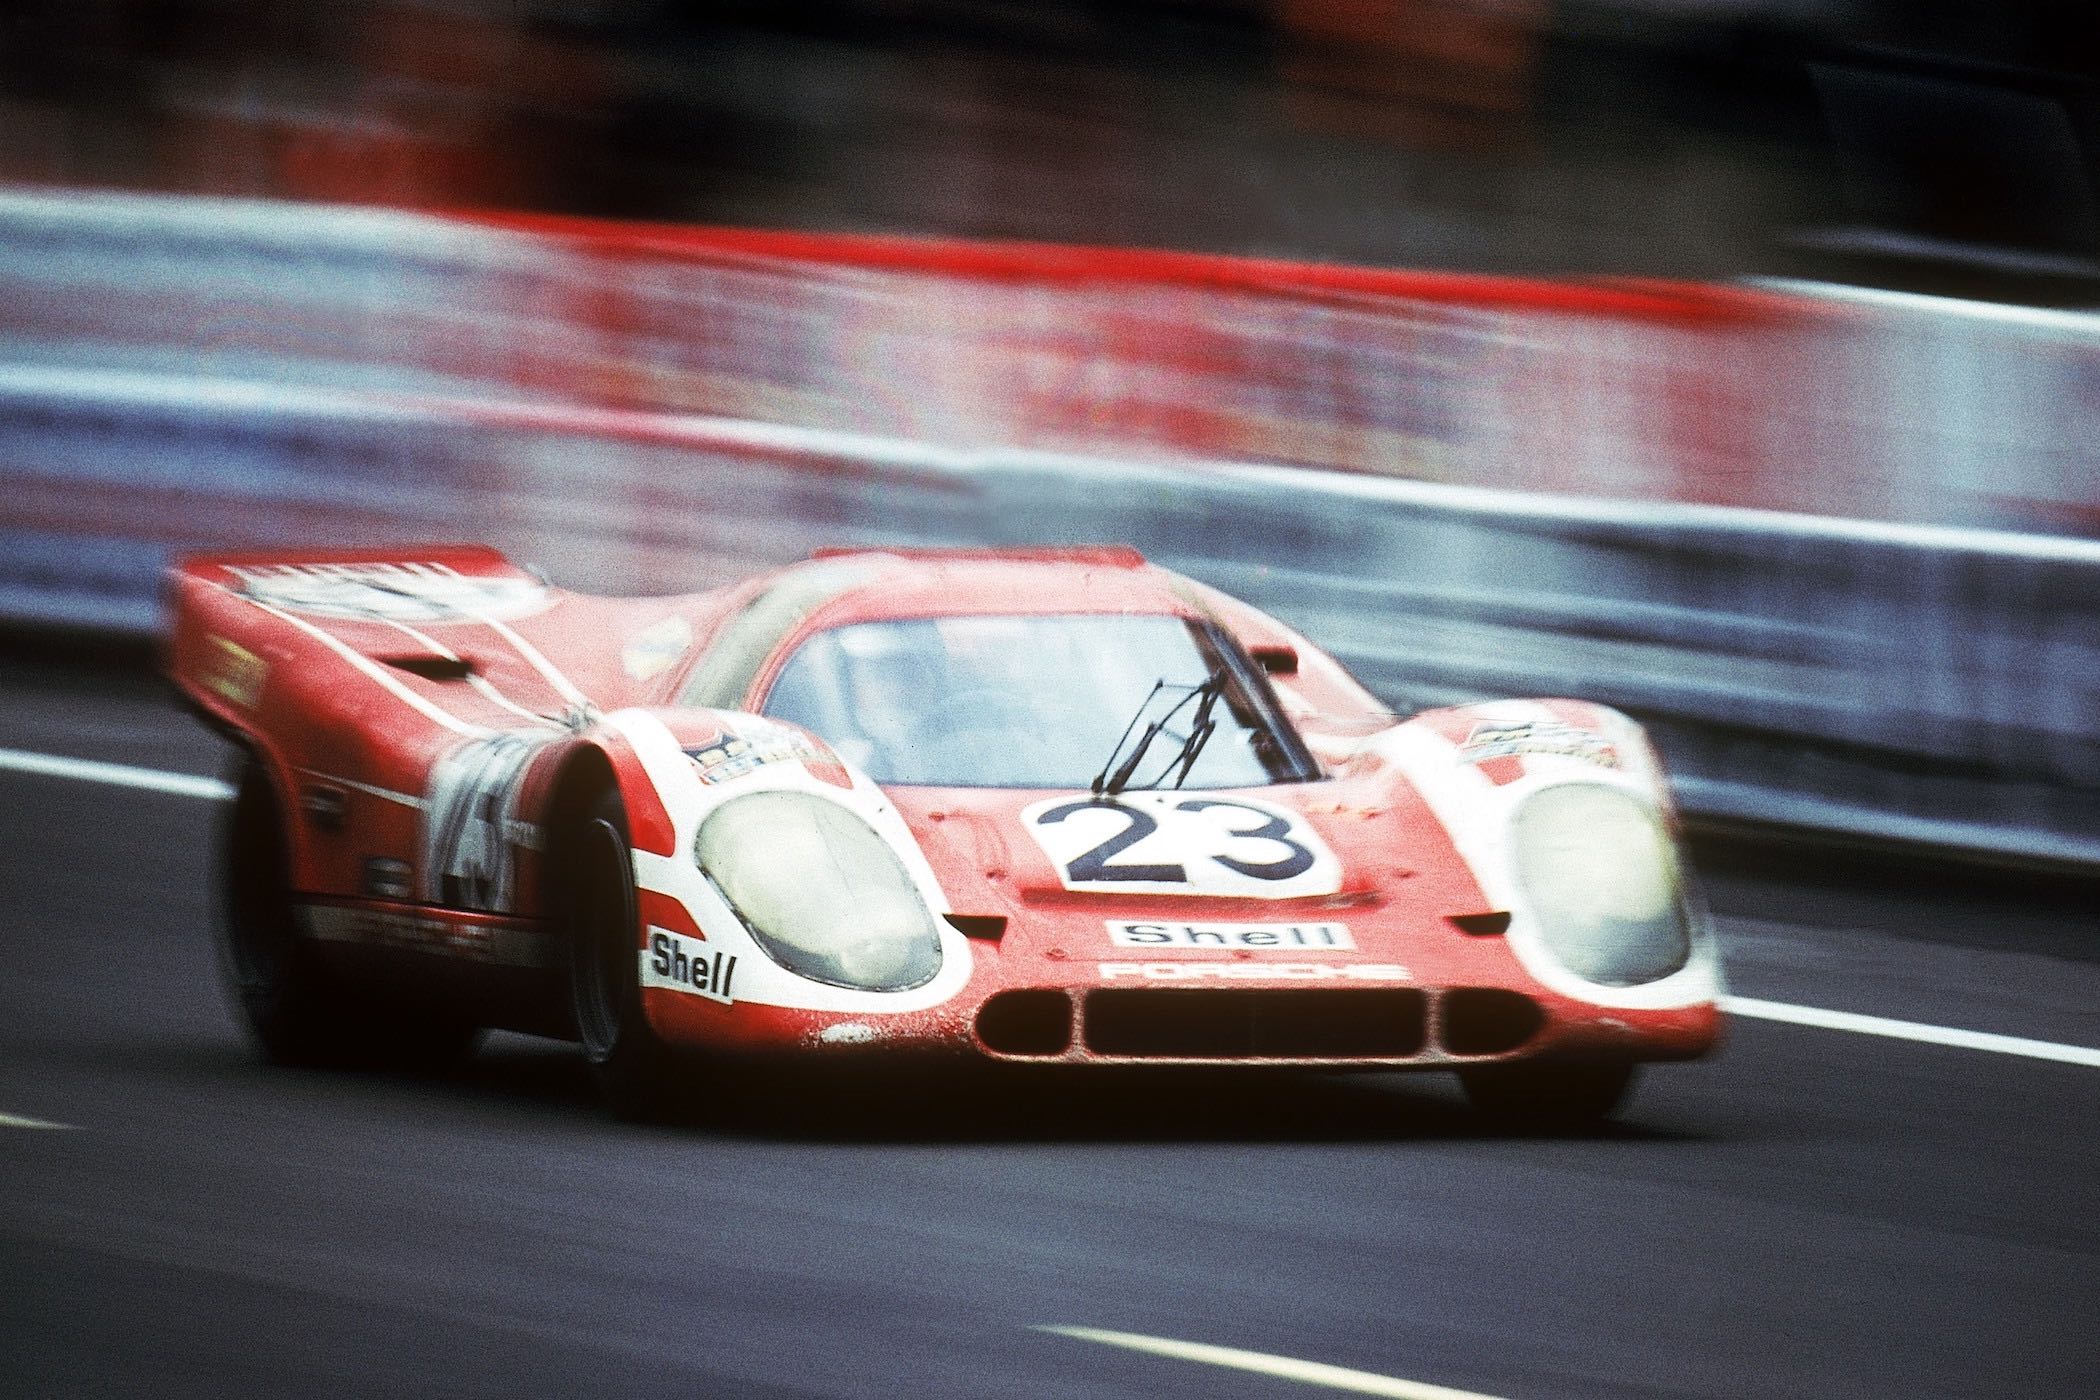 The Petrolhead Corner - An Ode to the Porsche 917 - The Most Iconic Race Car Ever Made